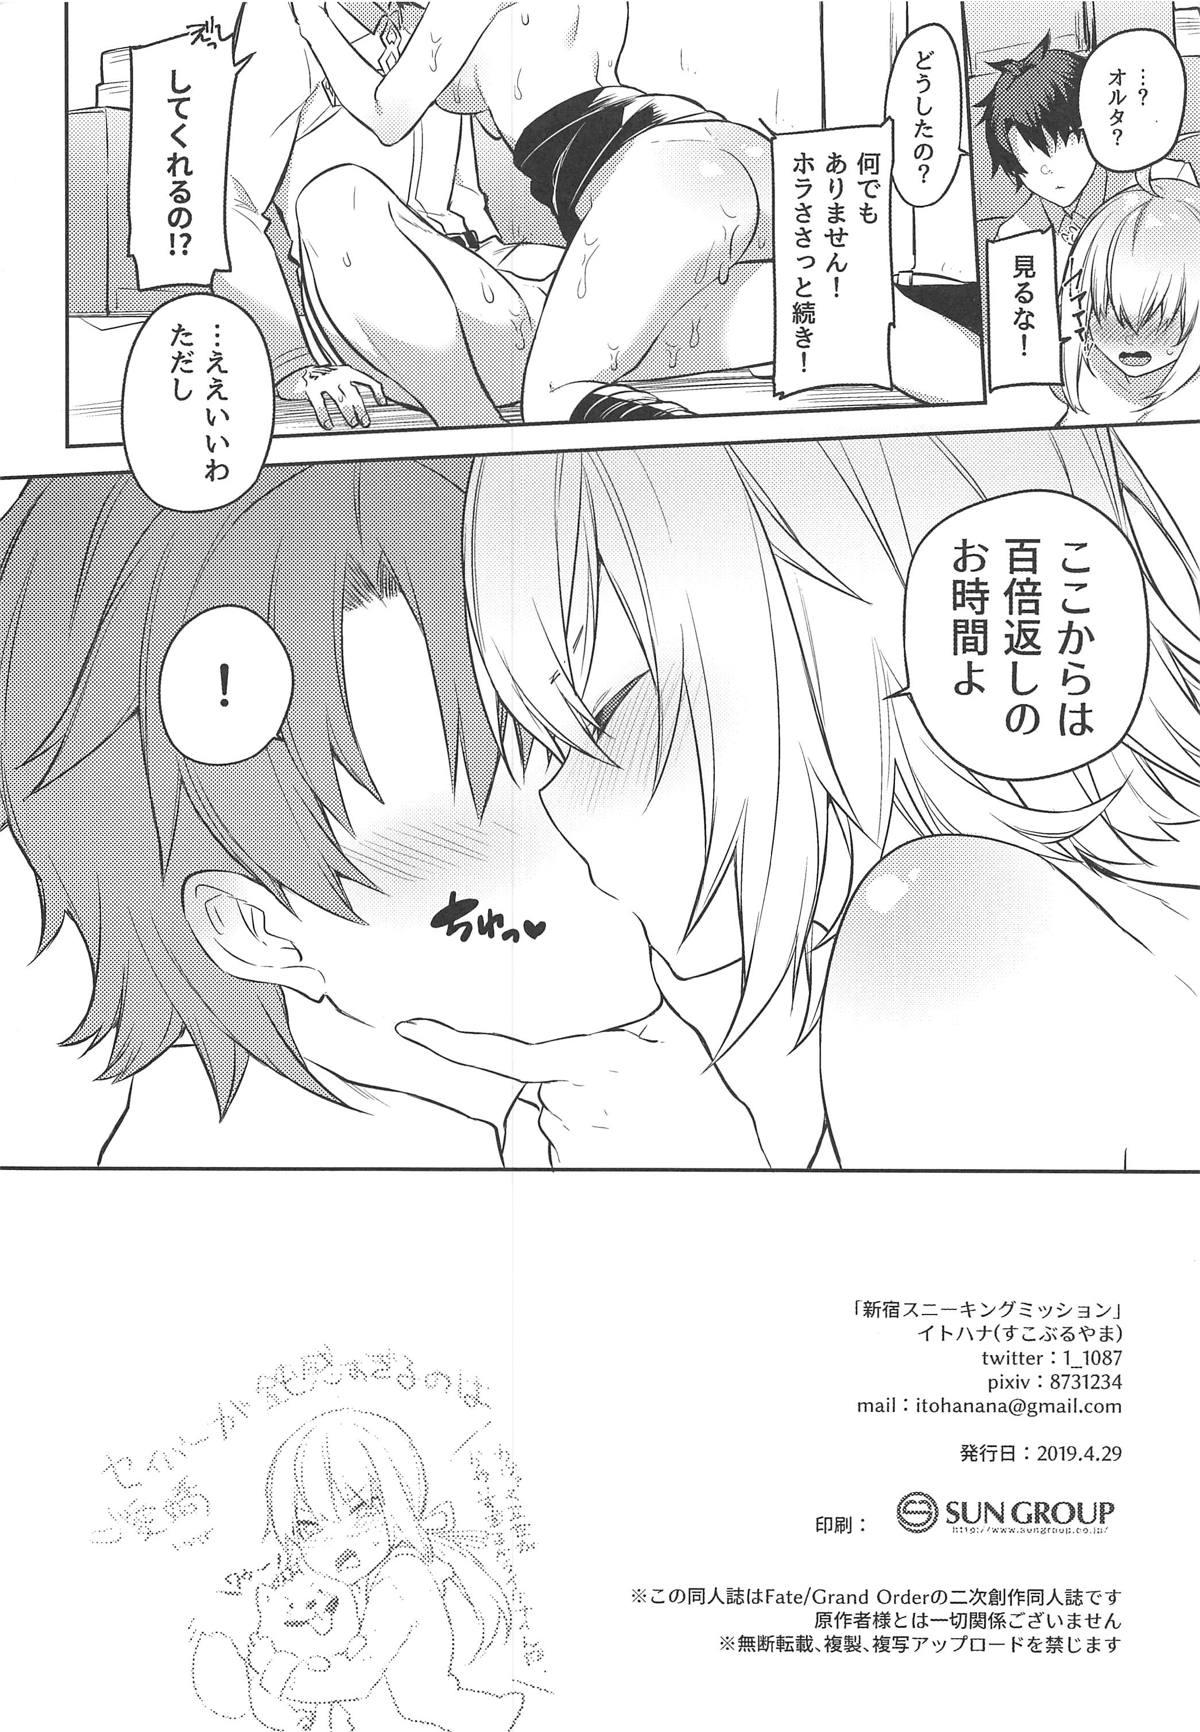 Sex Tape Shinjuku Sneaking Mission - Fate grand order Amateurs Gone - Page 23